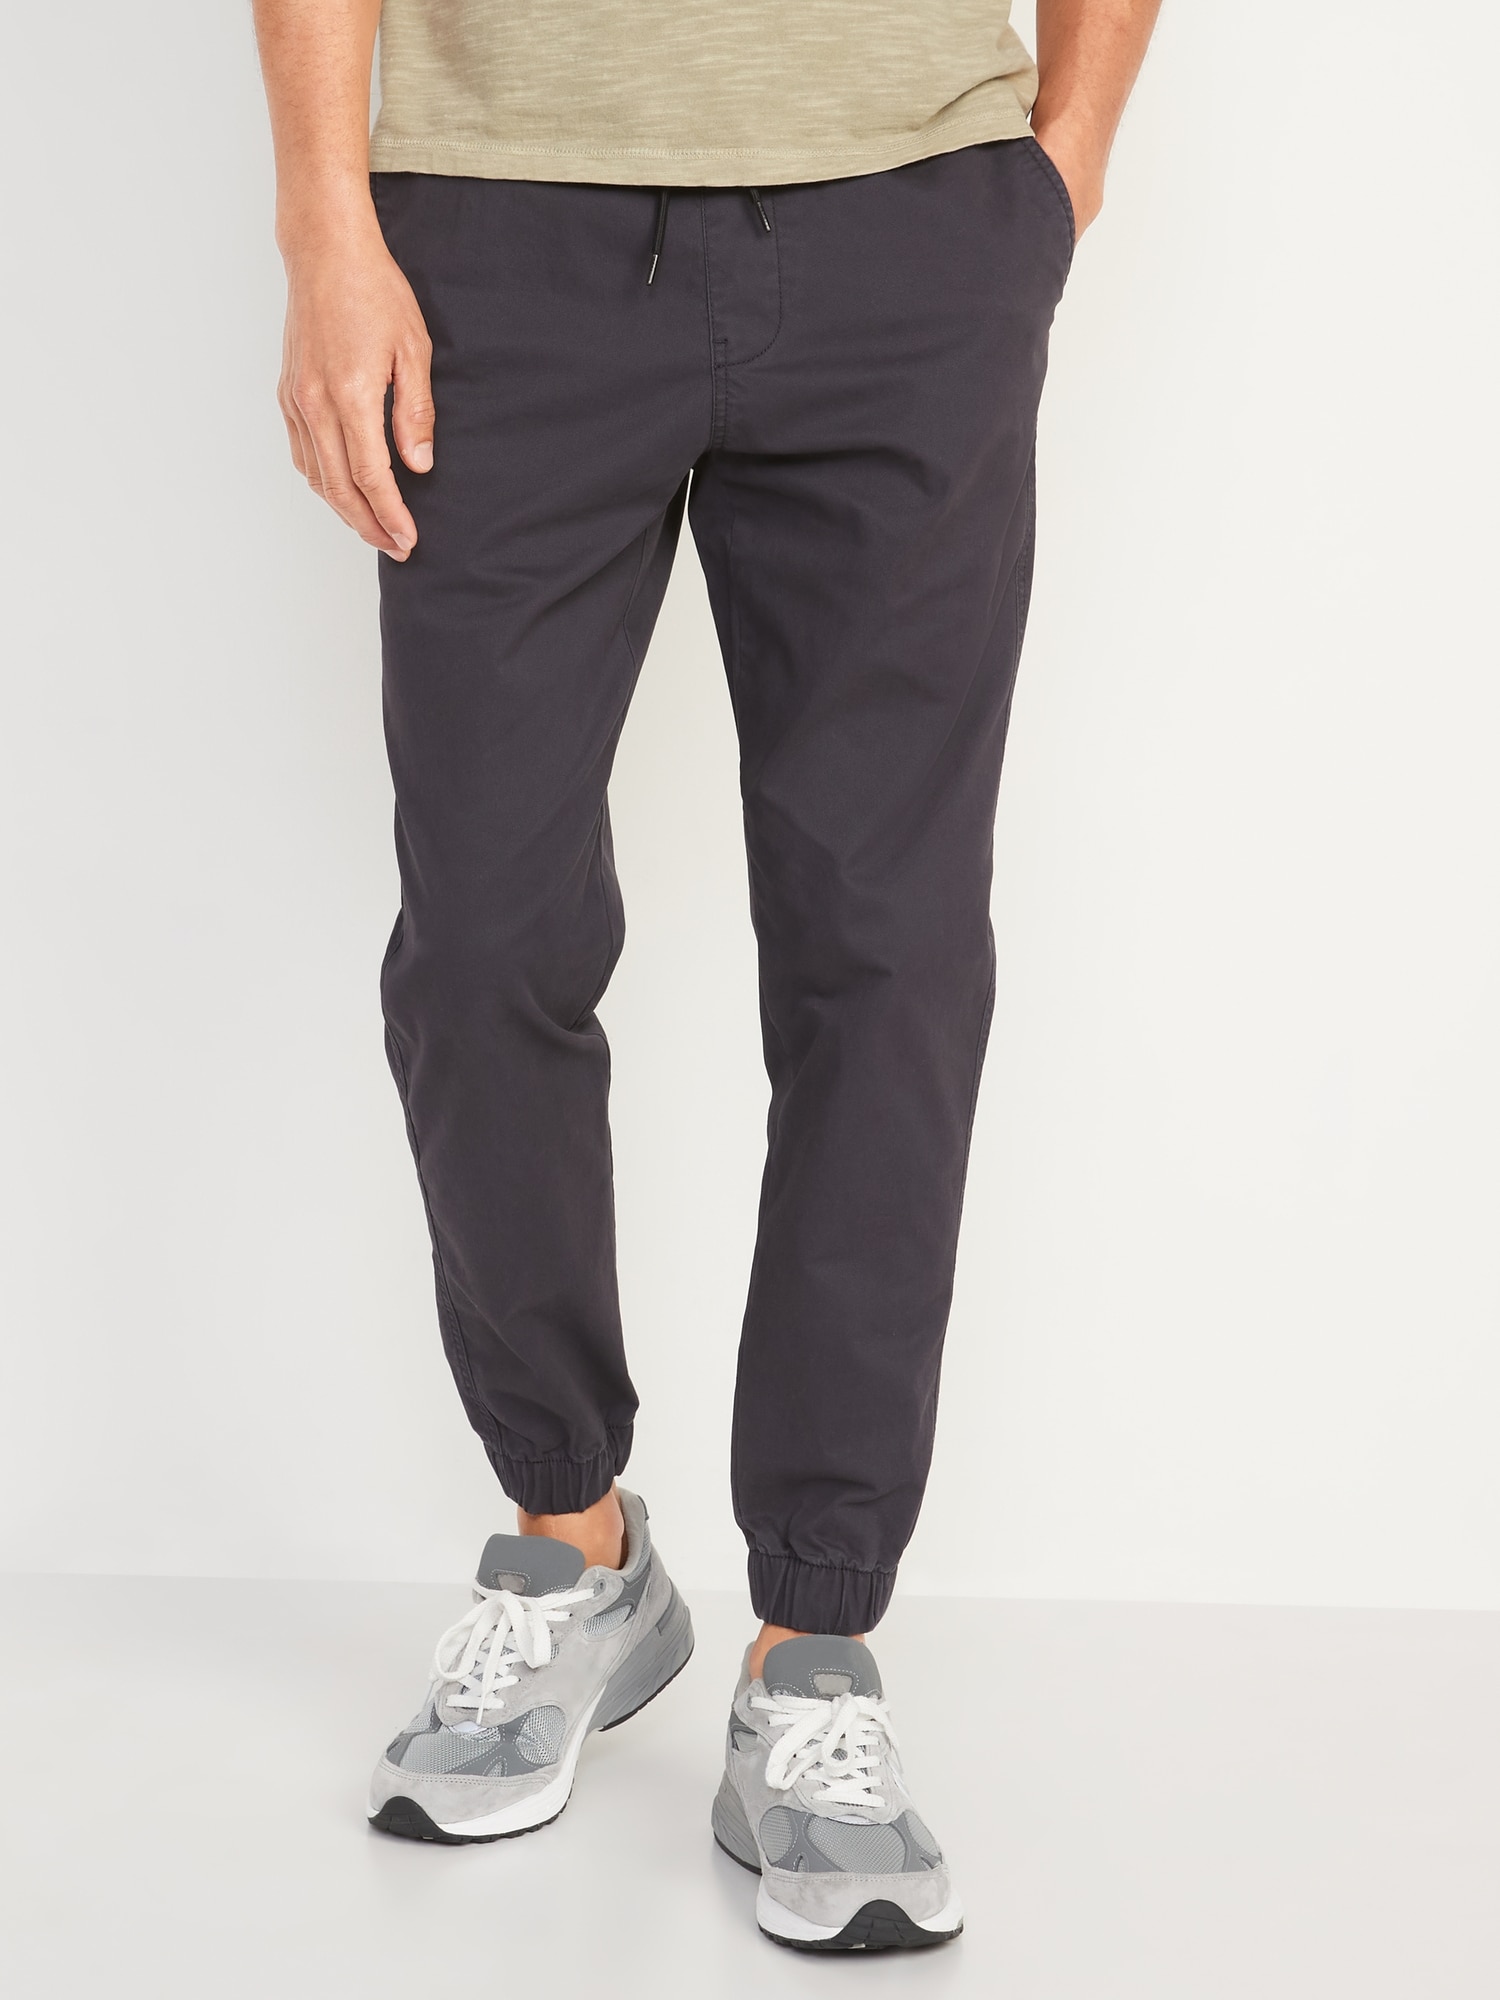 Today Only! $12.60 Women's Powersoft Joggers & $8.40 Men's Go-Dry Track  Pants at Old Navy - The Freebie Guy: Freebies, Penny Shopping, Deals, &  Giveaways